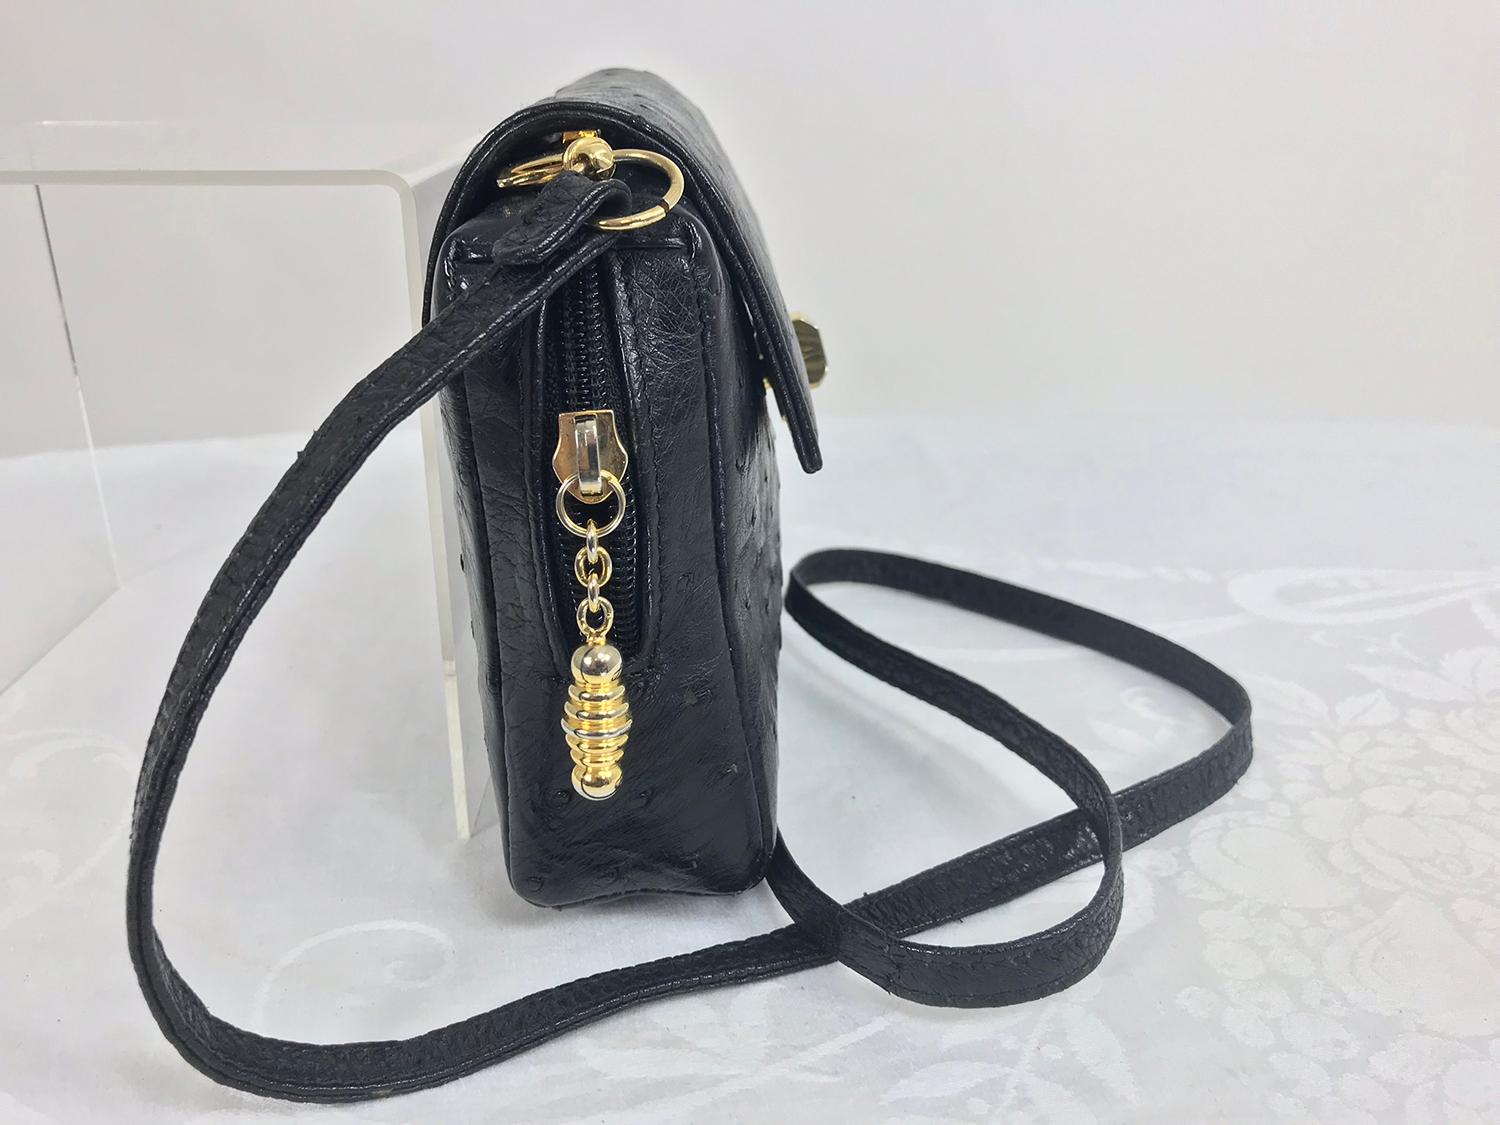 Helene Black Ostrich Cross Body/Clutch handbag Made in Italy. This beautiful bag is the perfect size for a day of shopping, it will hold all your necessary items and leave your hands free! Remove the strap and carry it as a clutch for evenings. Made